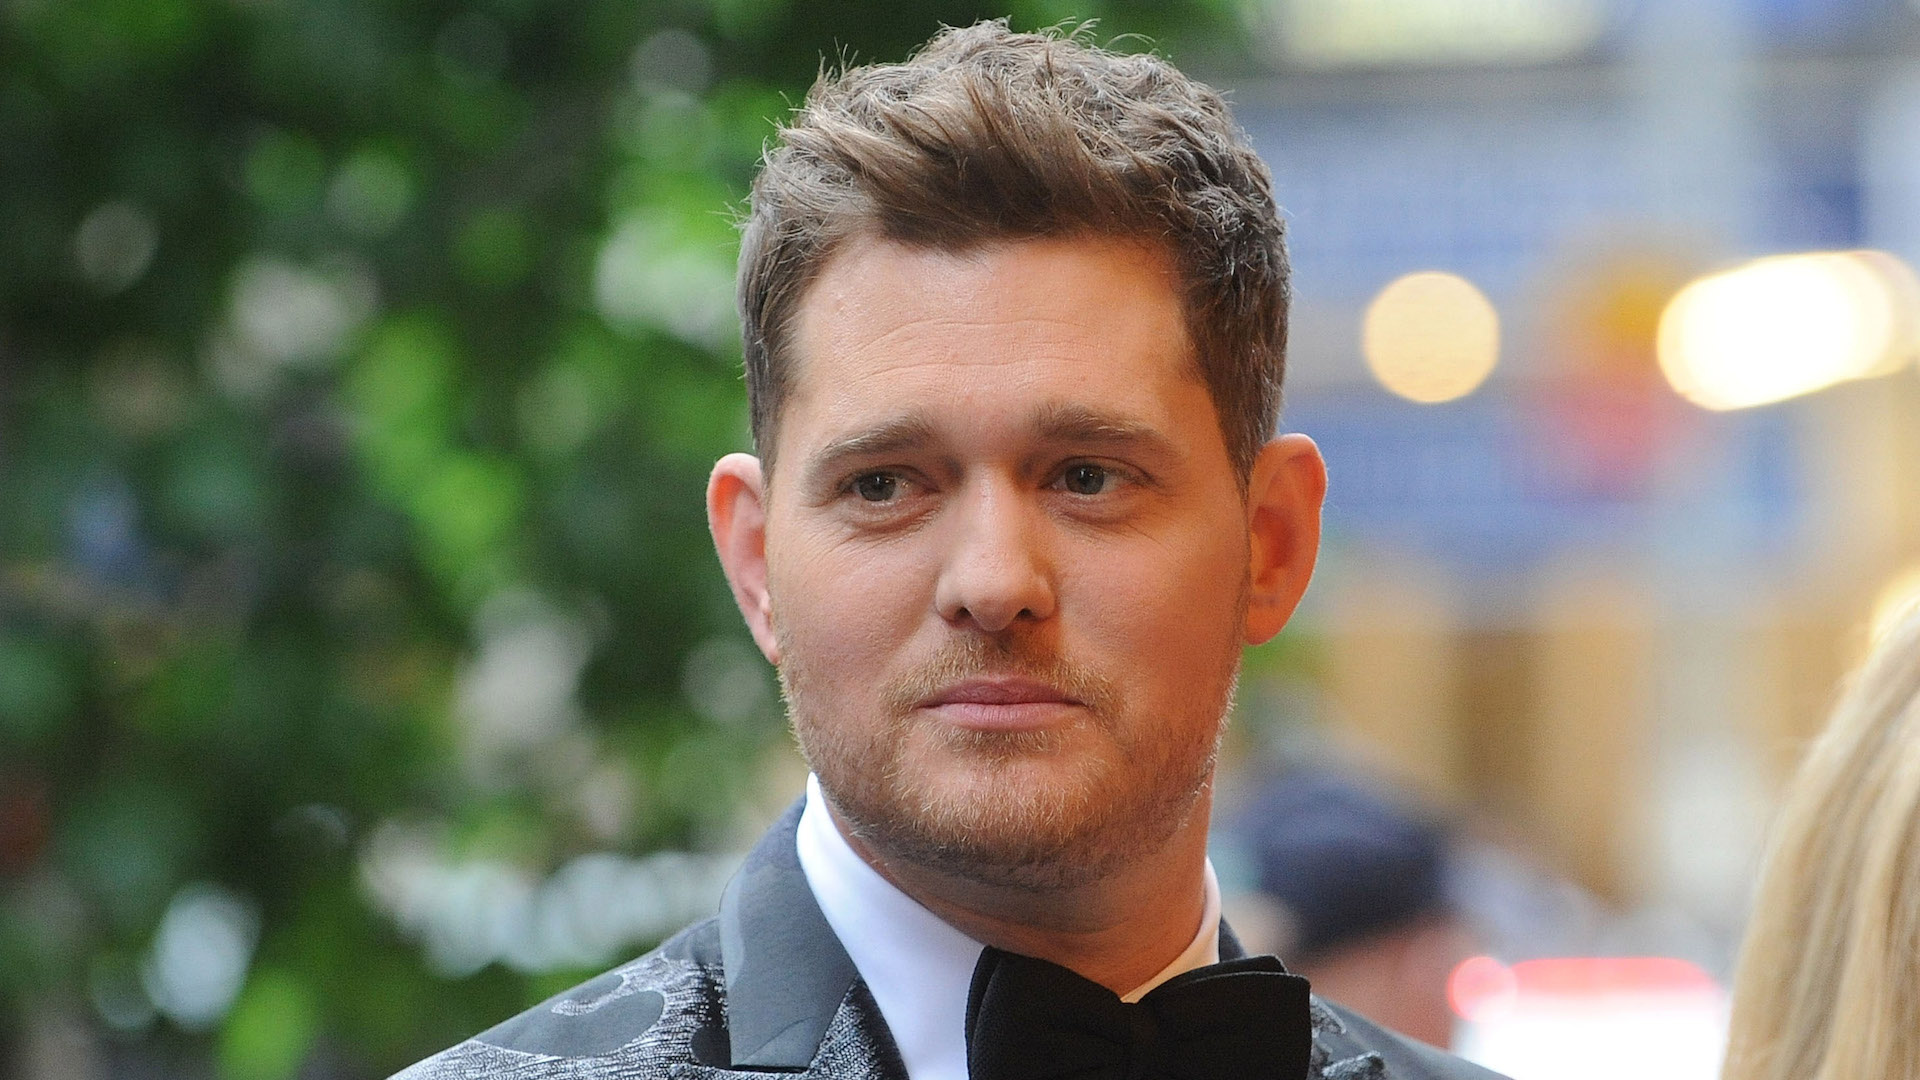 Michael Buble, Son's cancer battle, Emotional interview, Family strength, 1920x1080 Full HD Desktop